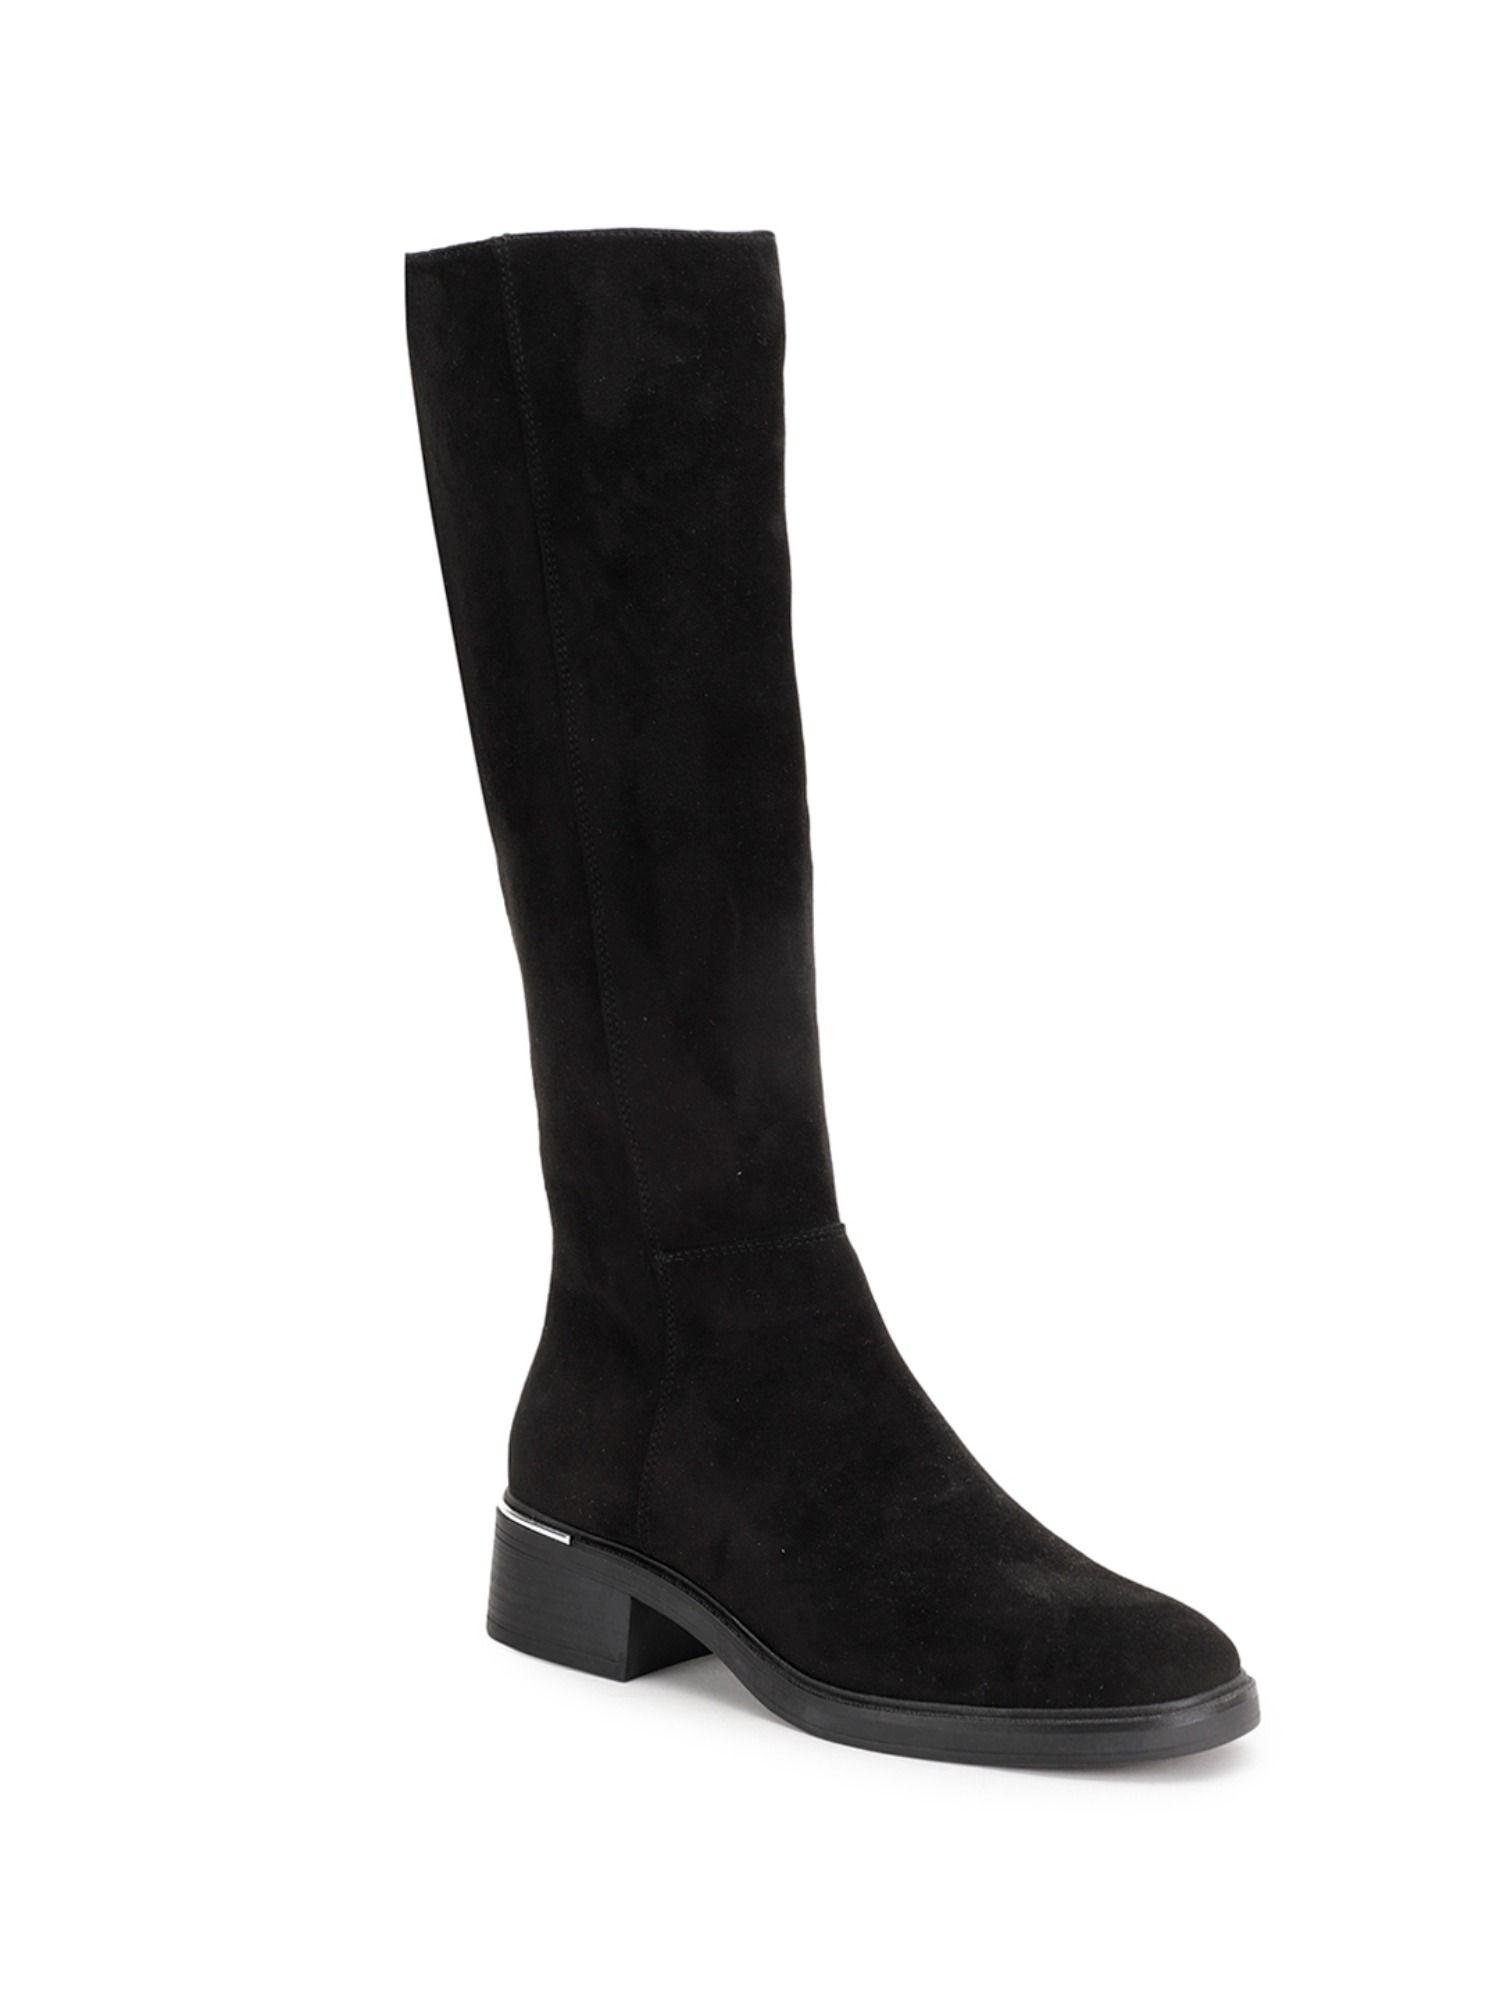 tag-womens-boots